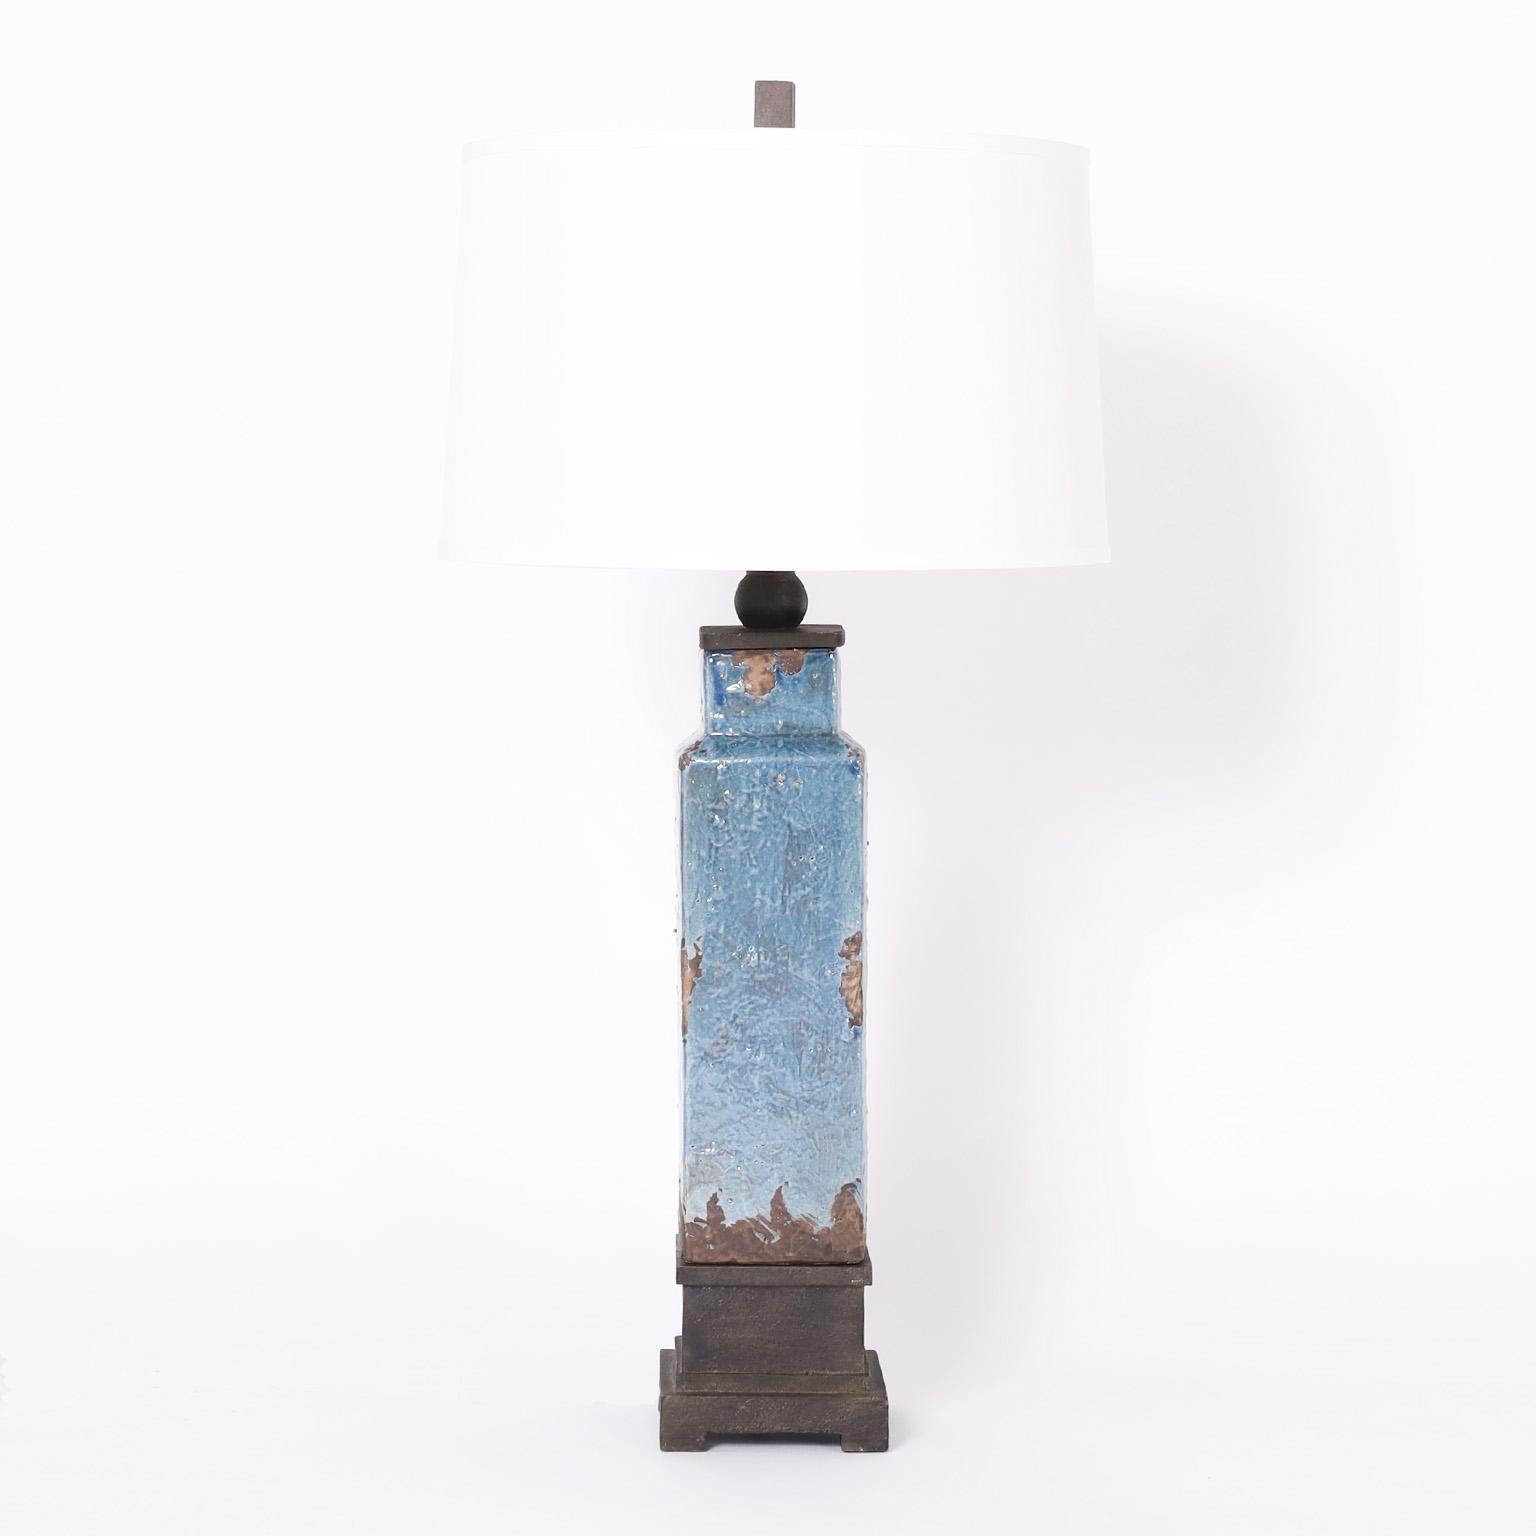 Chic pair of vintage table lamps crafted in terracotta in a sleek simple form decorated with a contrived distressed blue glaze, and having a modern yet classic cap and base in painted metal.